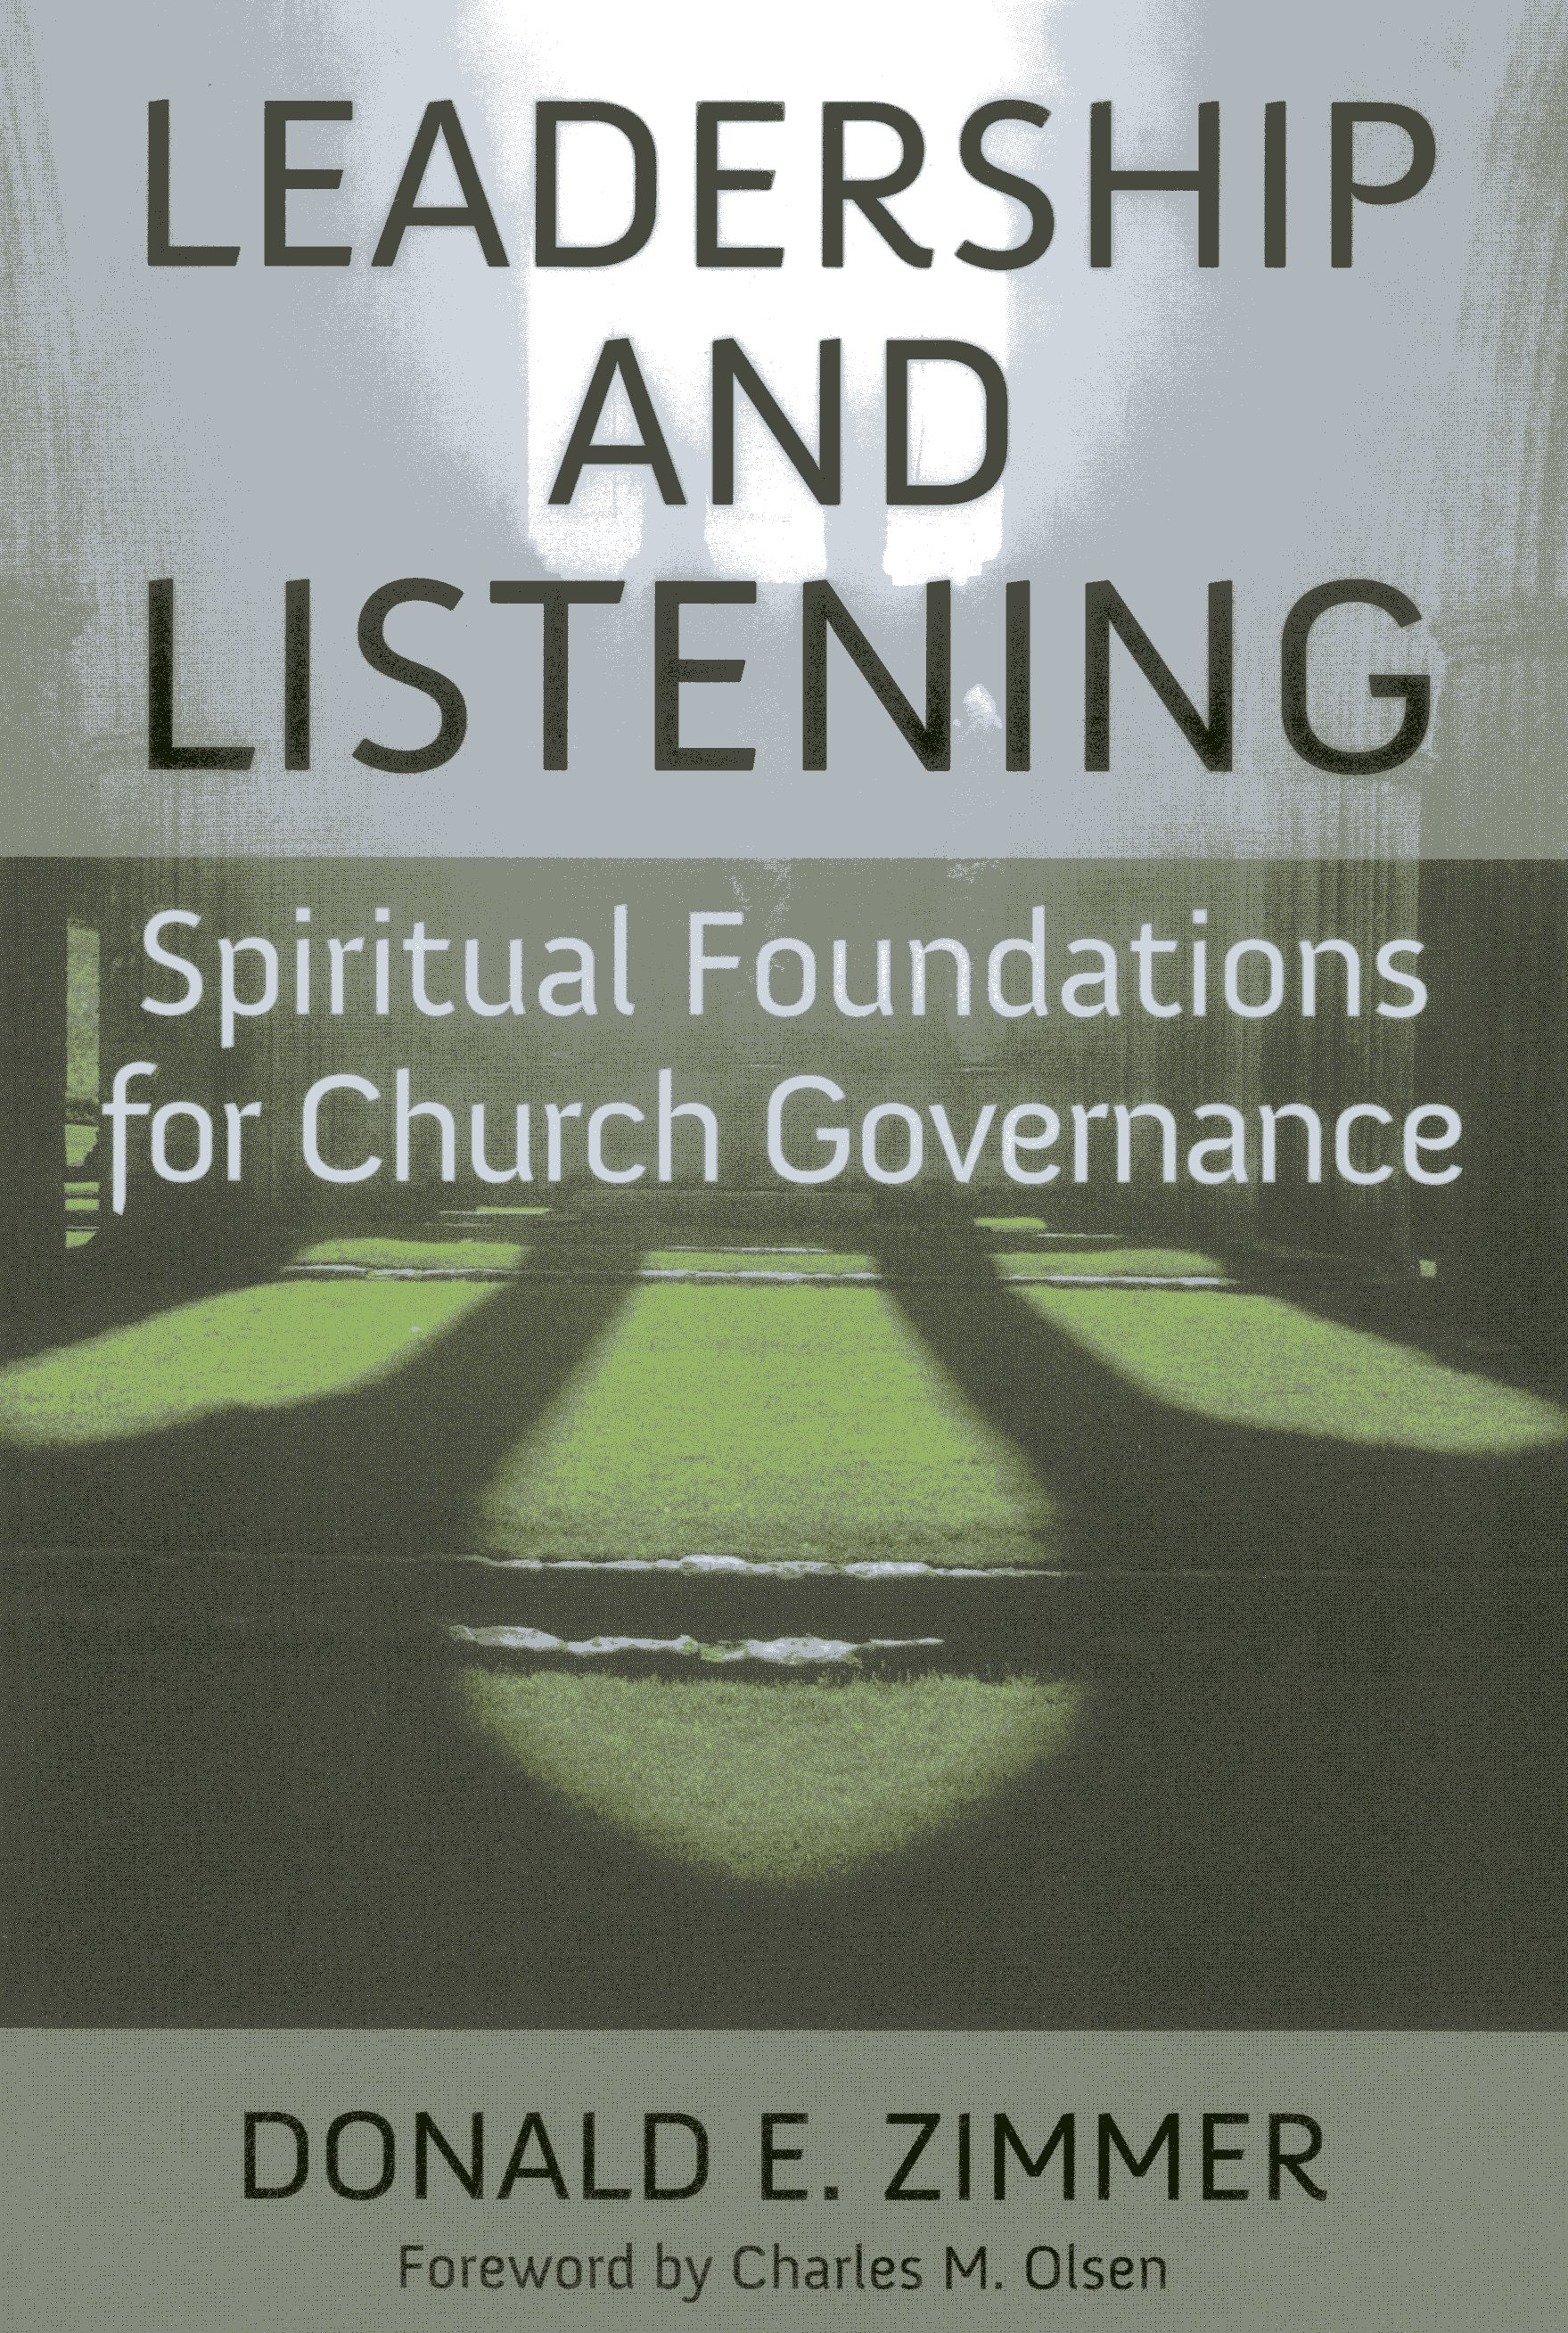 Leadership and Listening: Spiritual Foundations for Church Governance